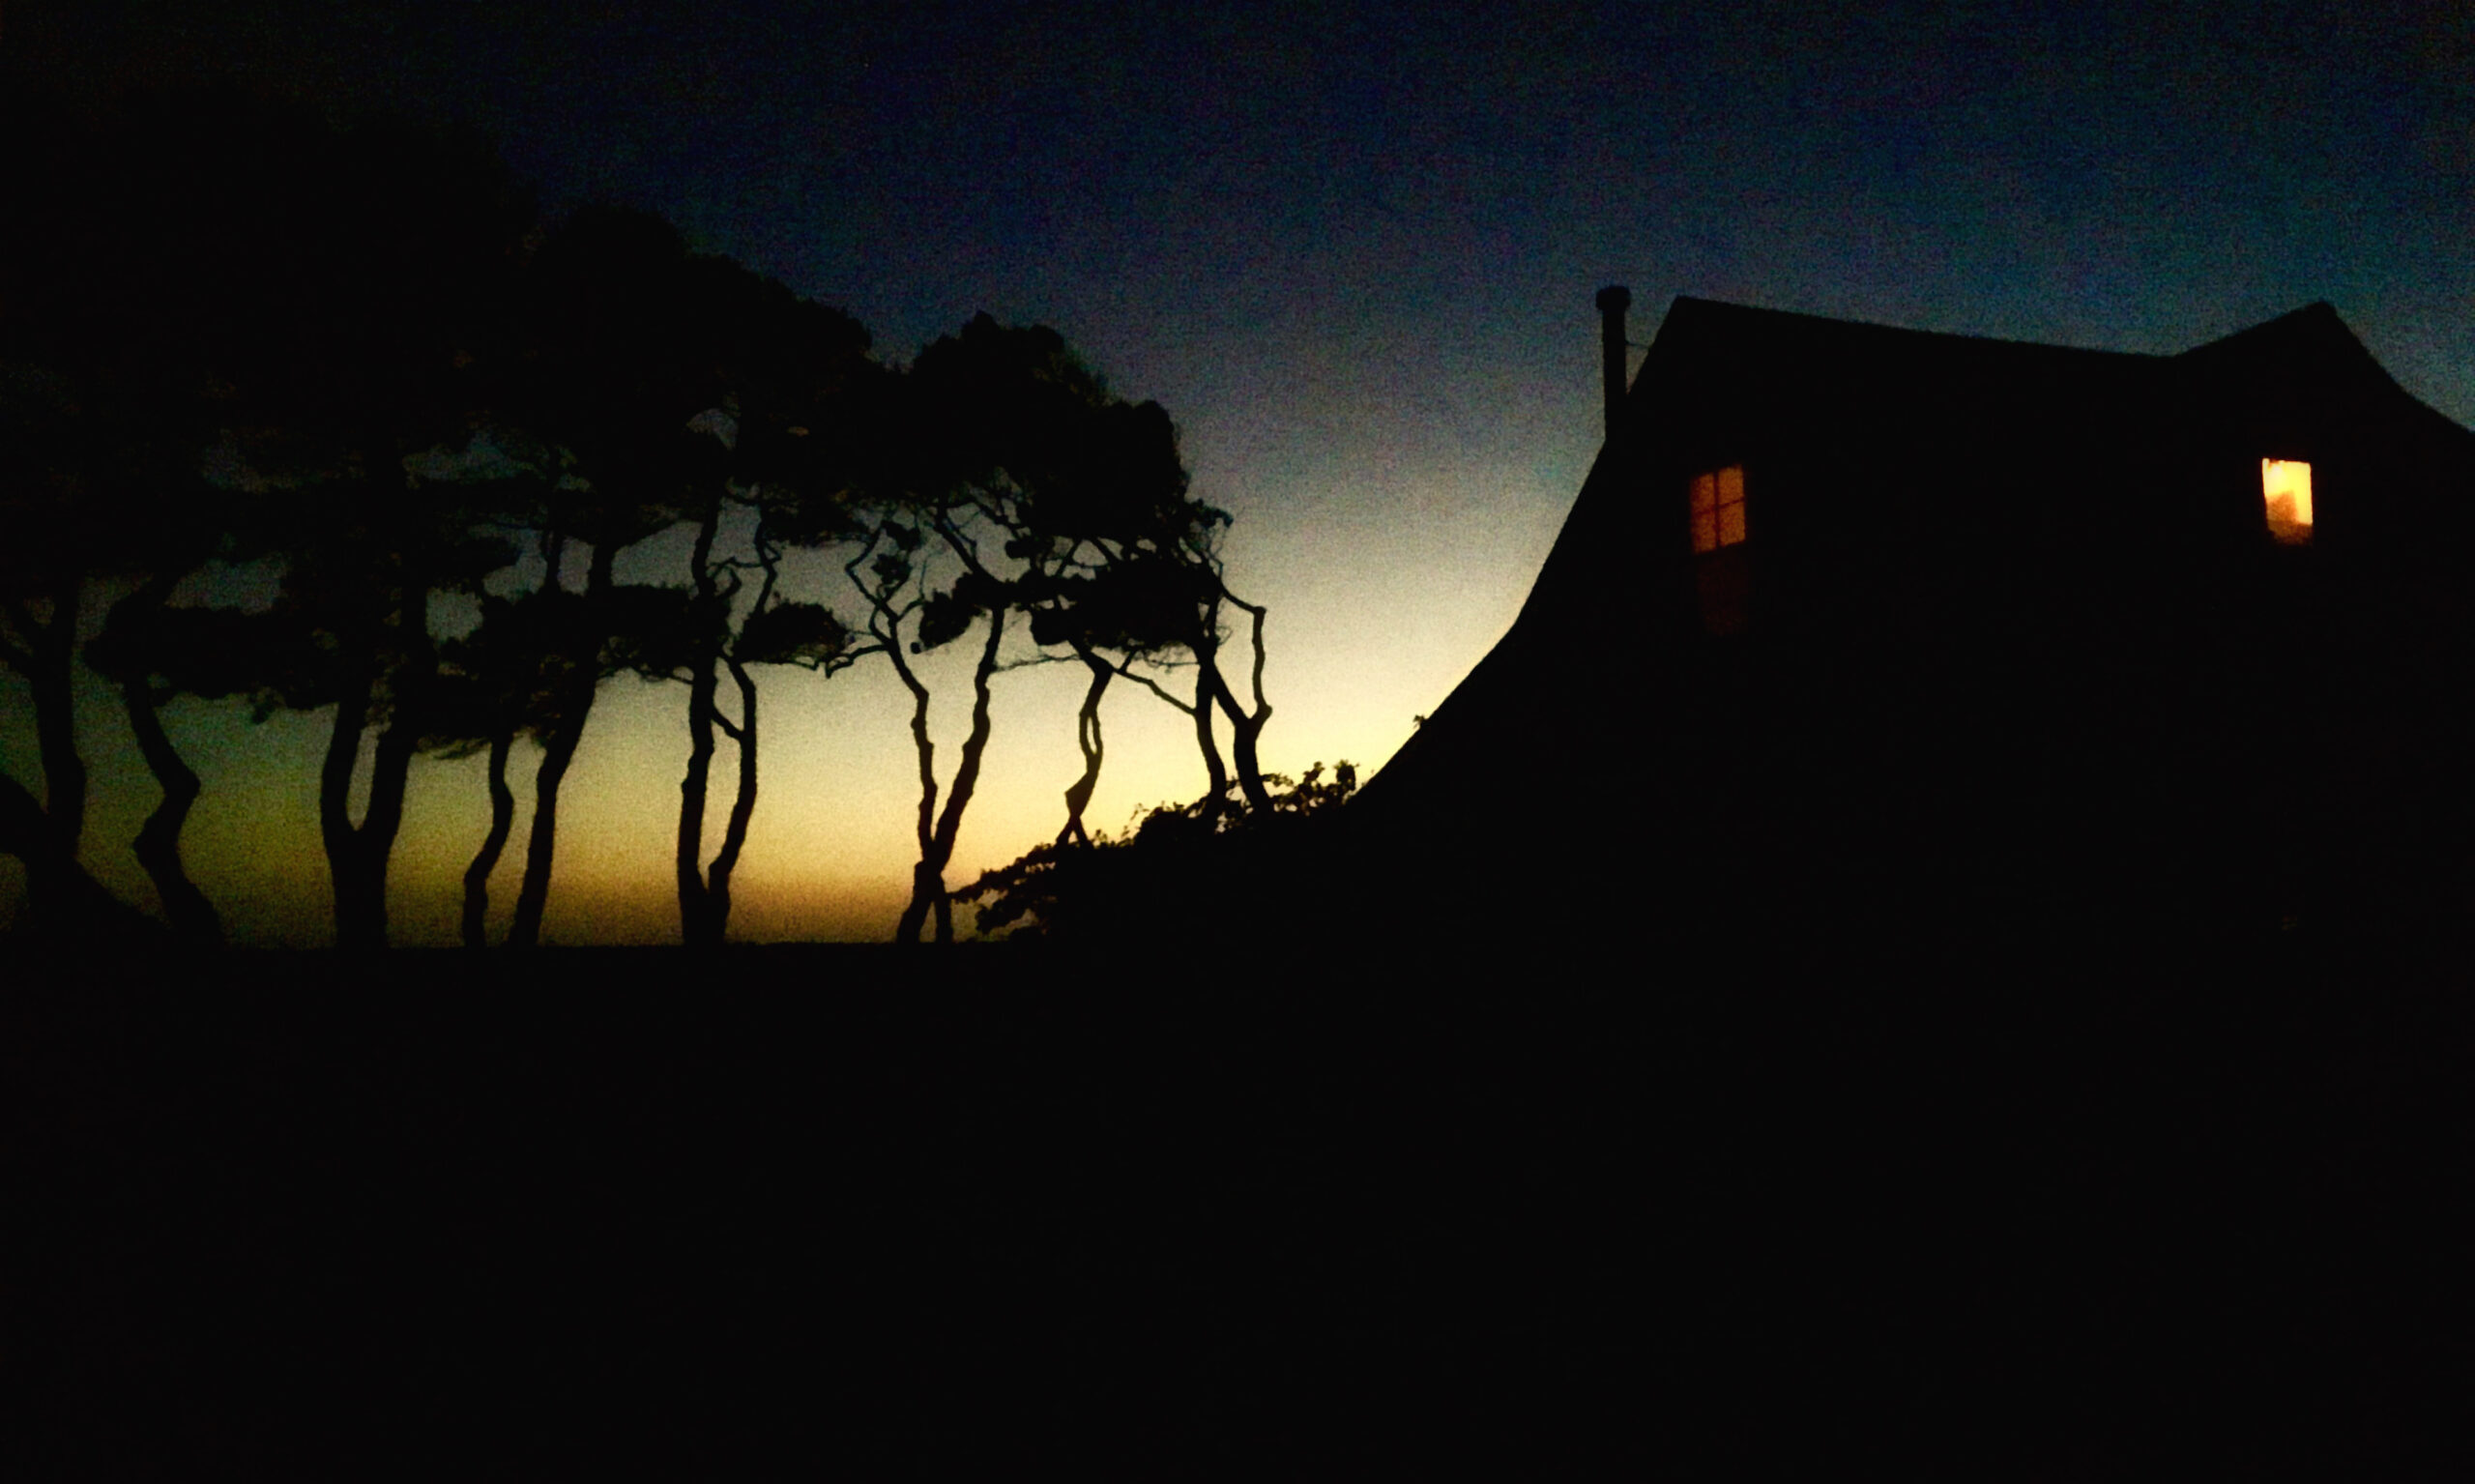 A silhouette of a house at dusk.